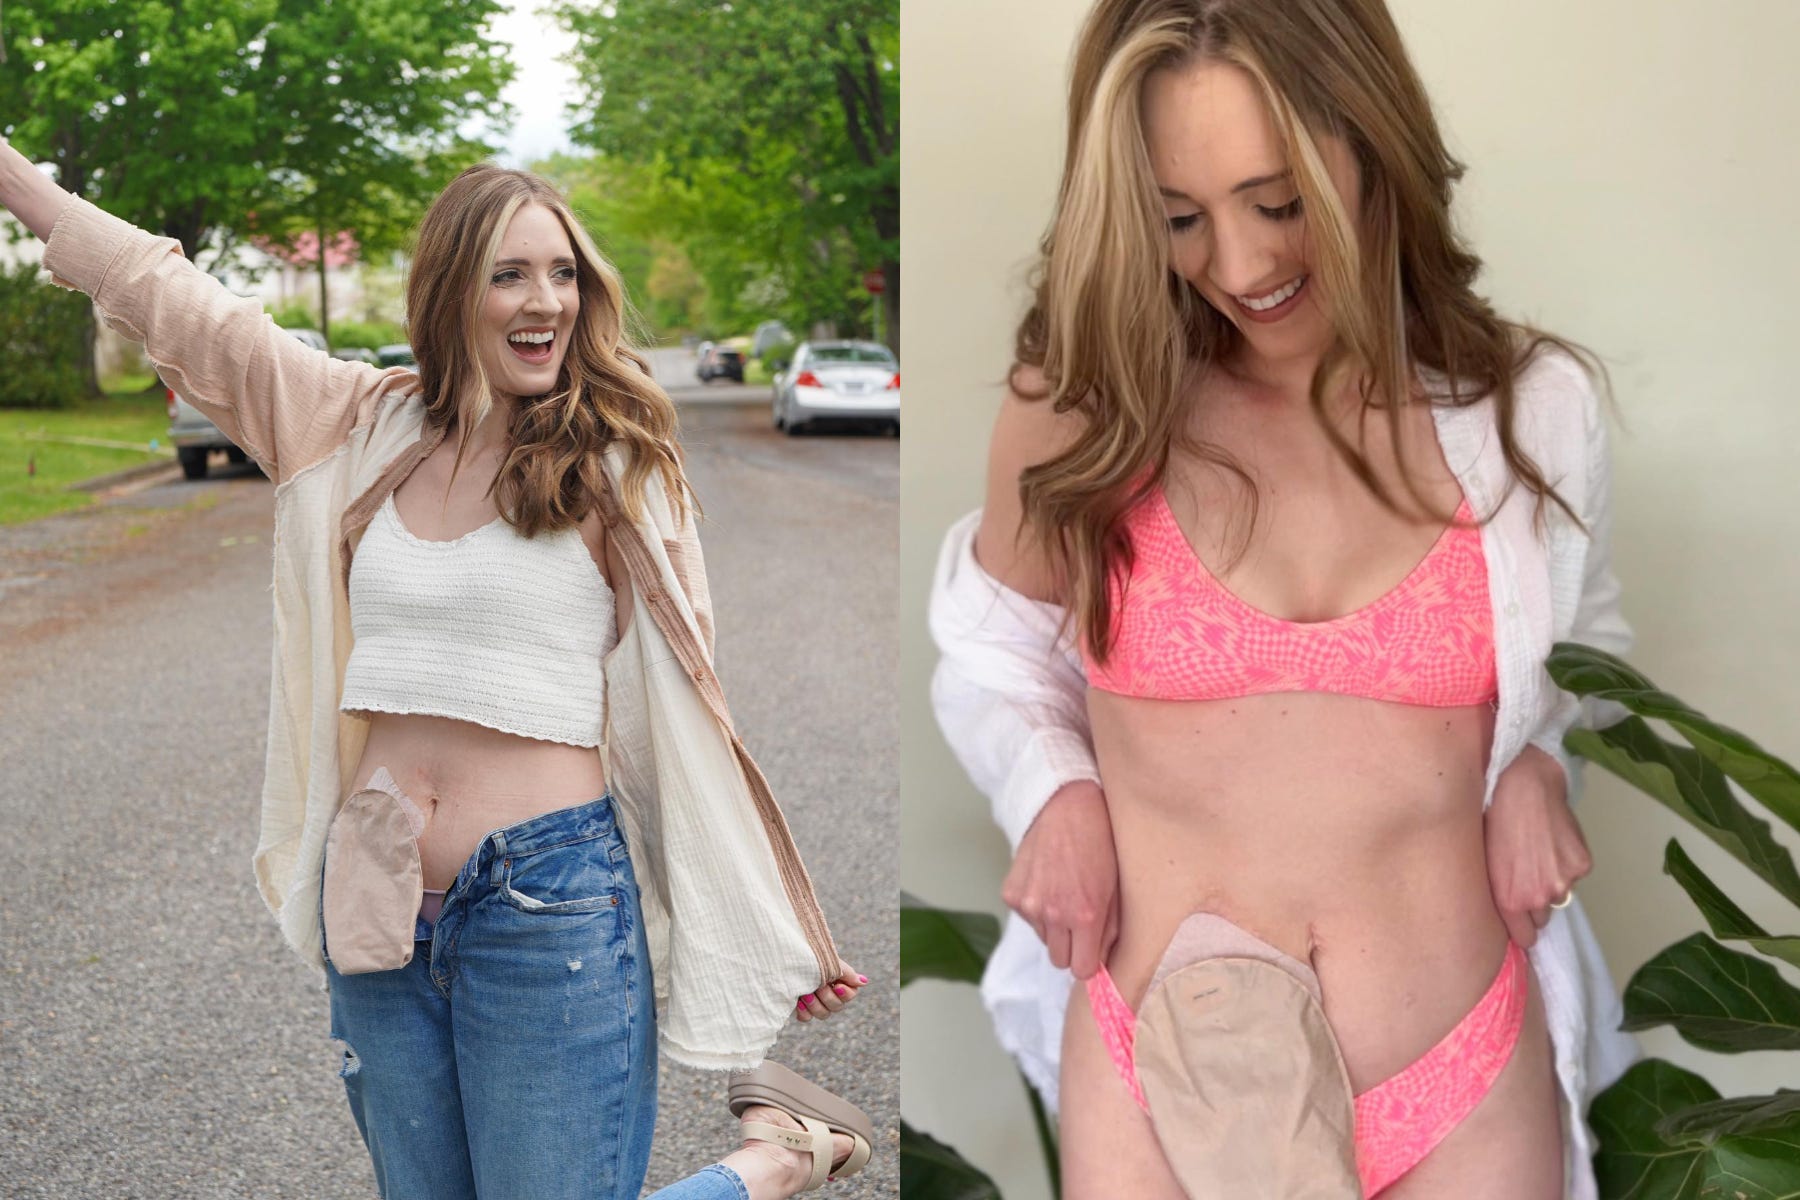 Mum with stoma bag shares bikini pictures to celebrate 'second chance at  life